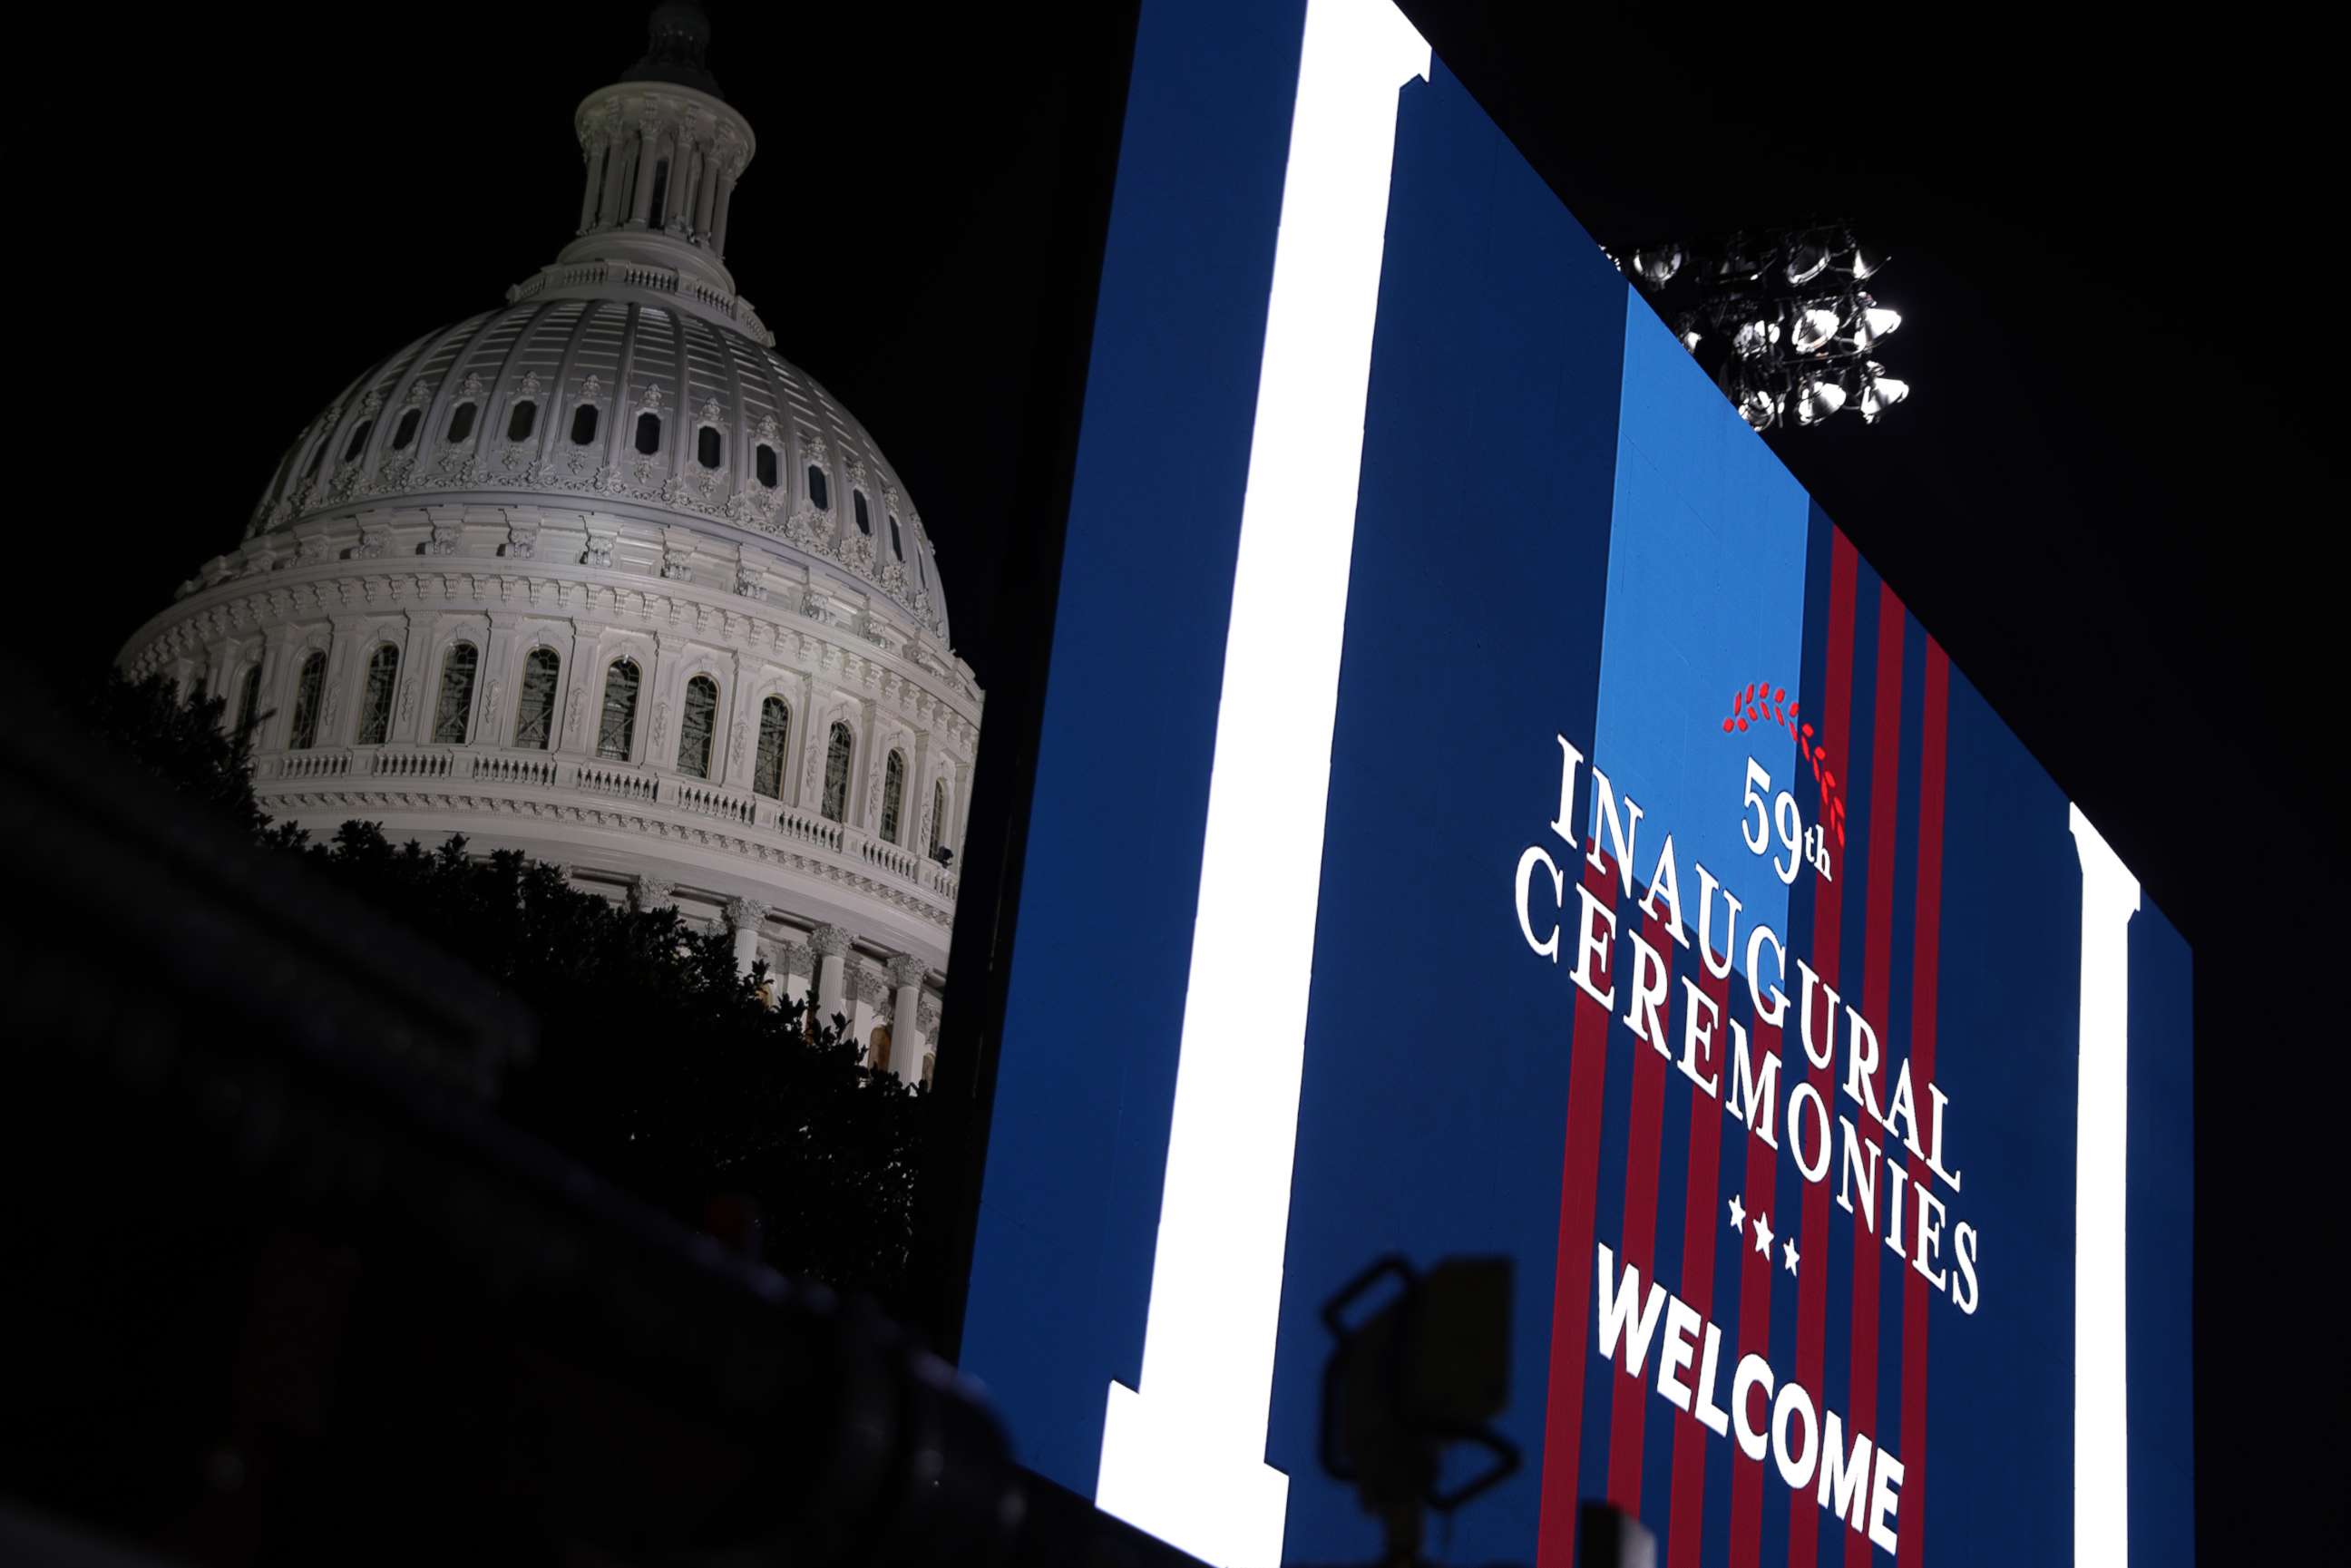 PHOTO: A jumbotron is seen ahead of the inauguration of U.S. President-elect Joe Biden on the West Front of the Capitol on Jan. 20, 2010 in Washington, D.C.